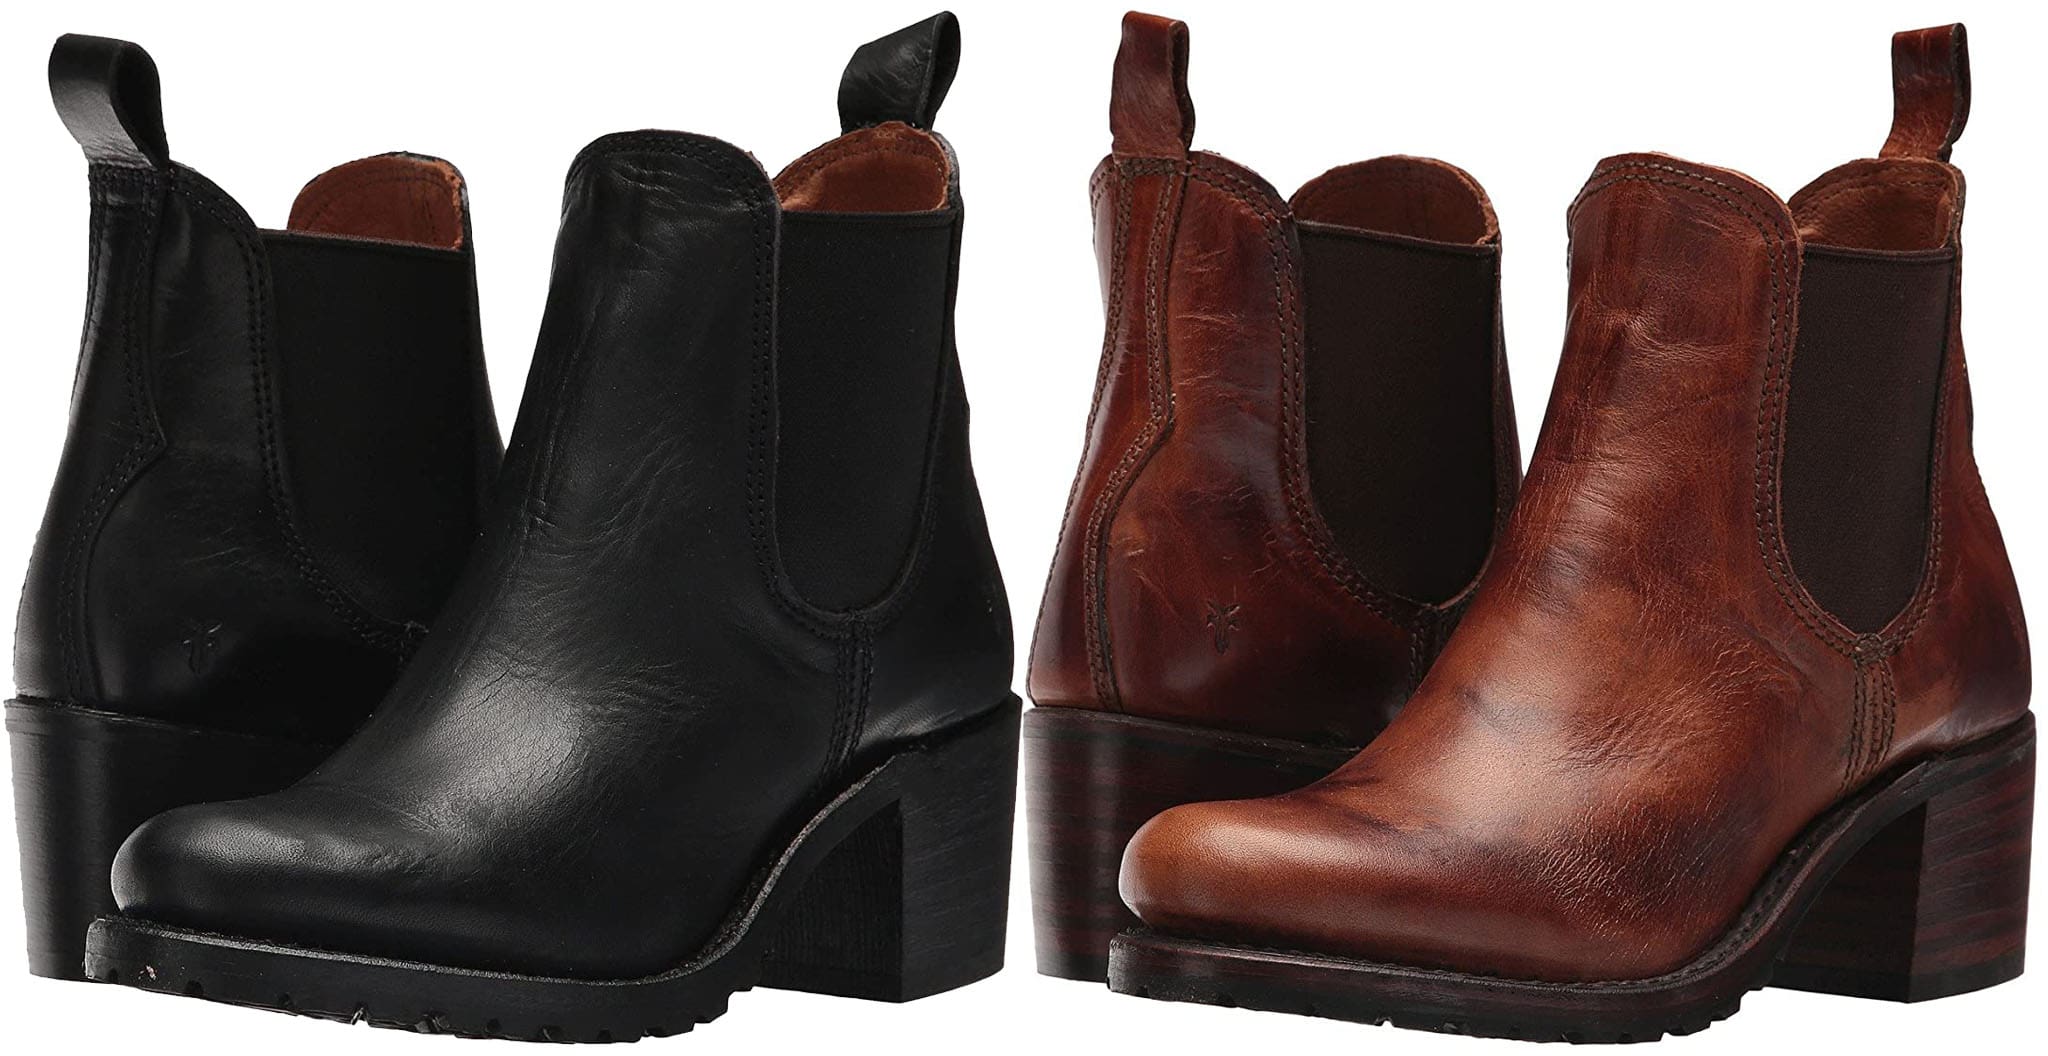 Mixing country with urban twist, these timeless Sabrina Chelsea boots are designed from smooth handworked full-grain oil-tanned Italian leather with round toes, elasticated side gores, and low block heels with a Goodyear welted construction